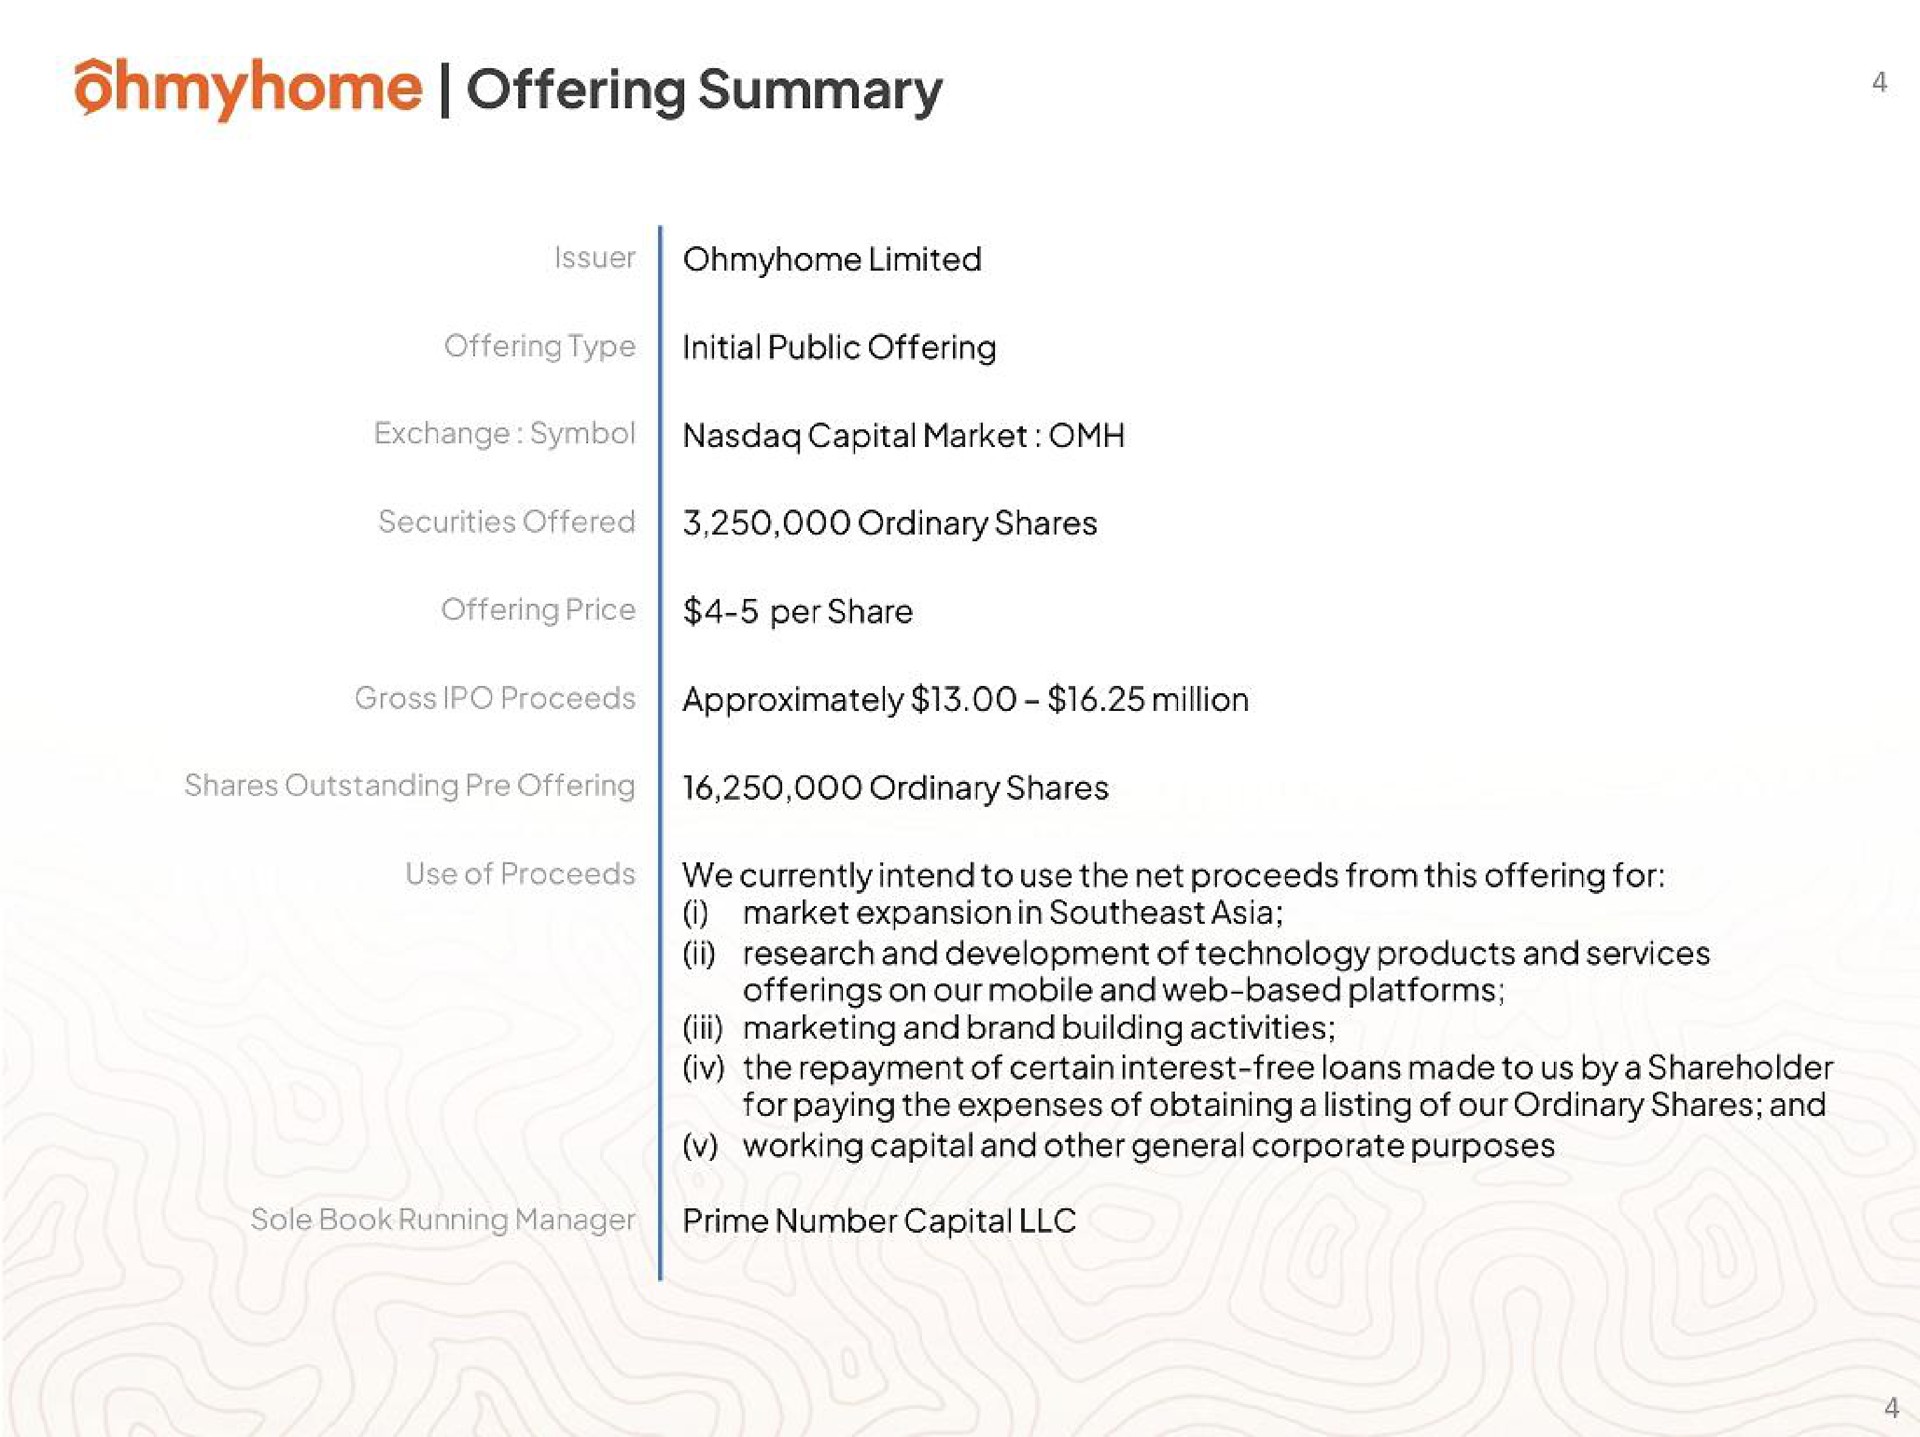 offering summary | Ohmyhome